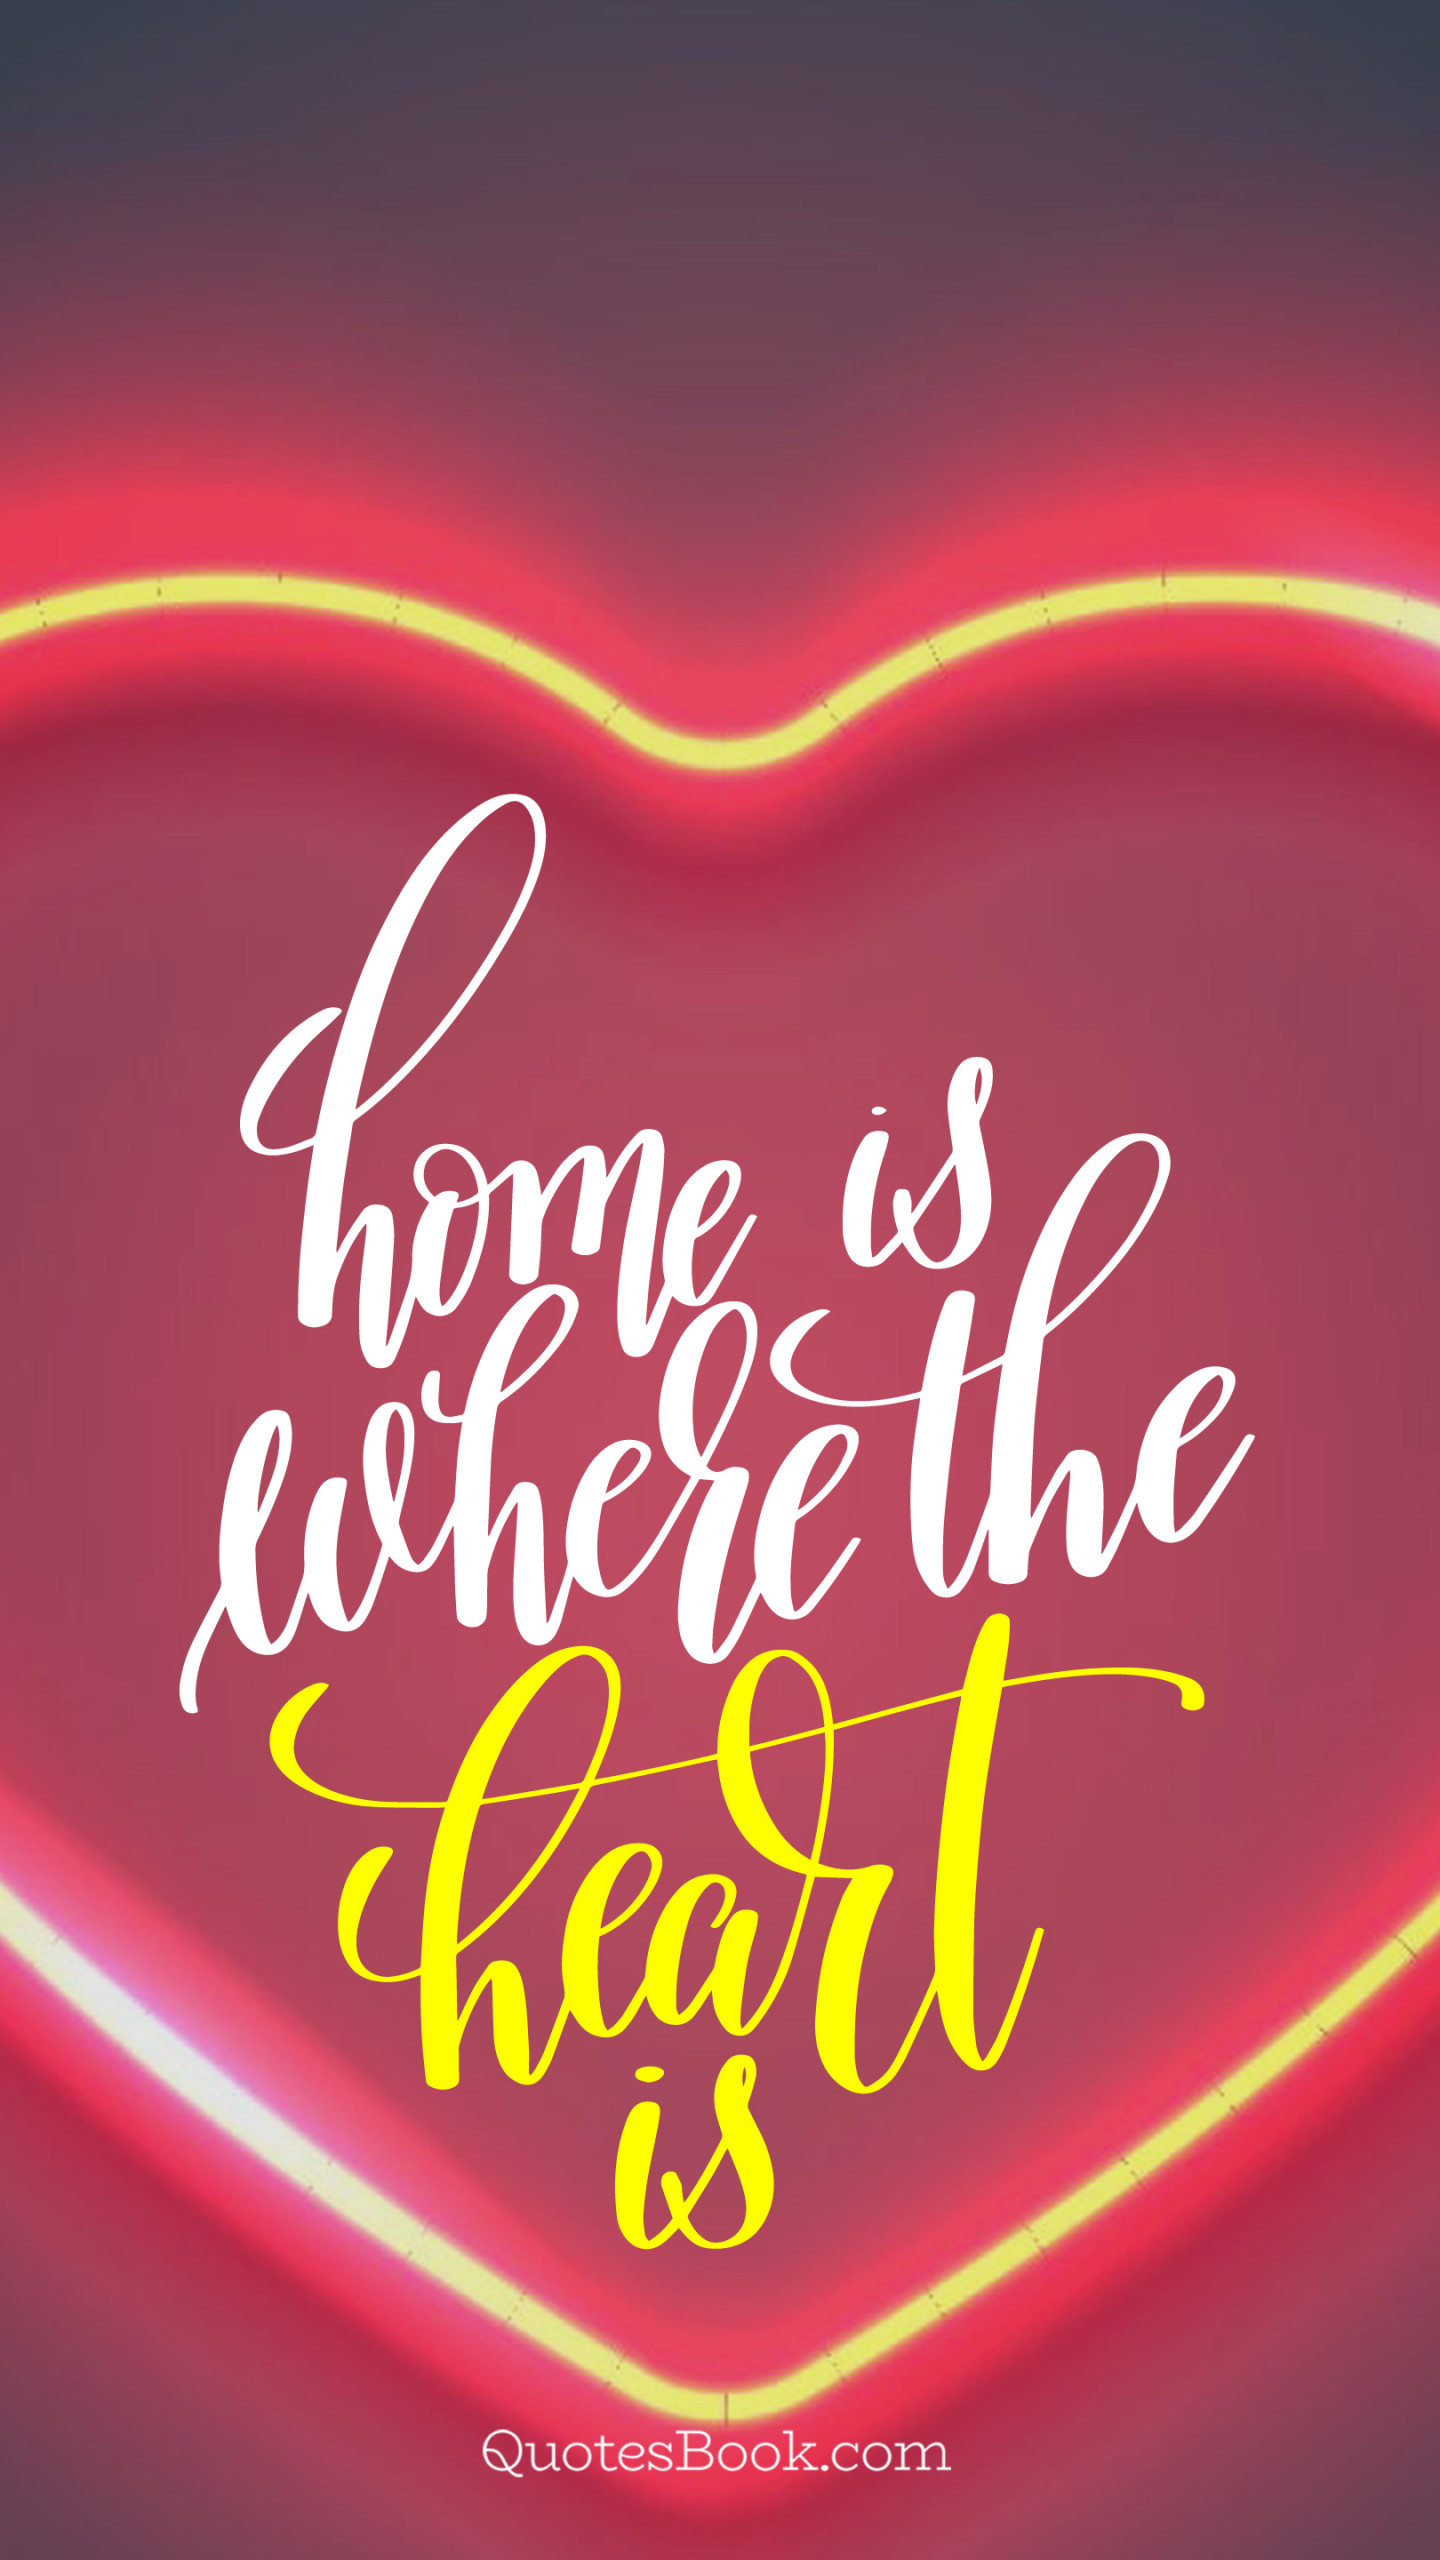 Home Is Where The Heart Is Quotesbook